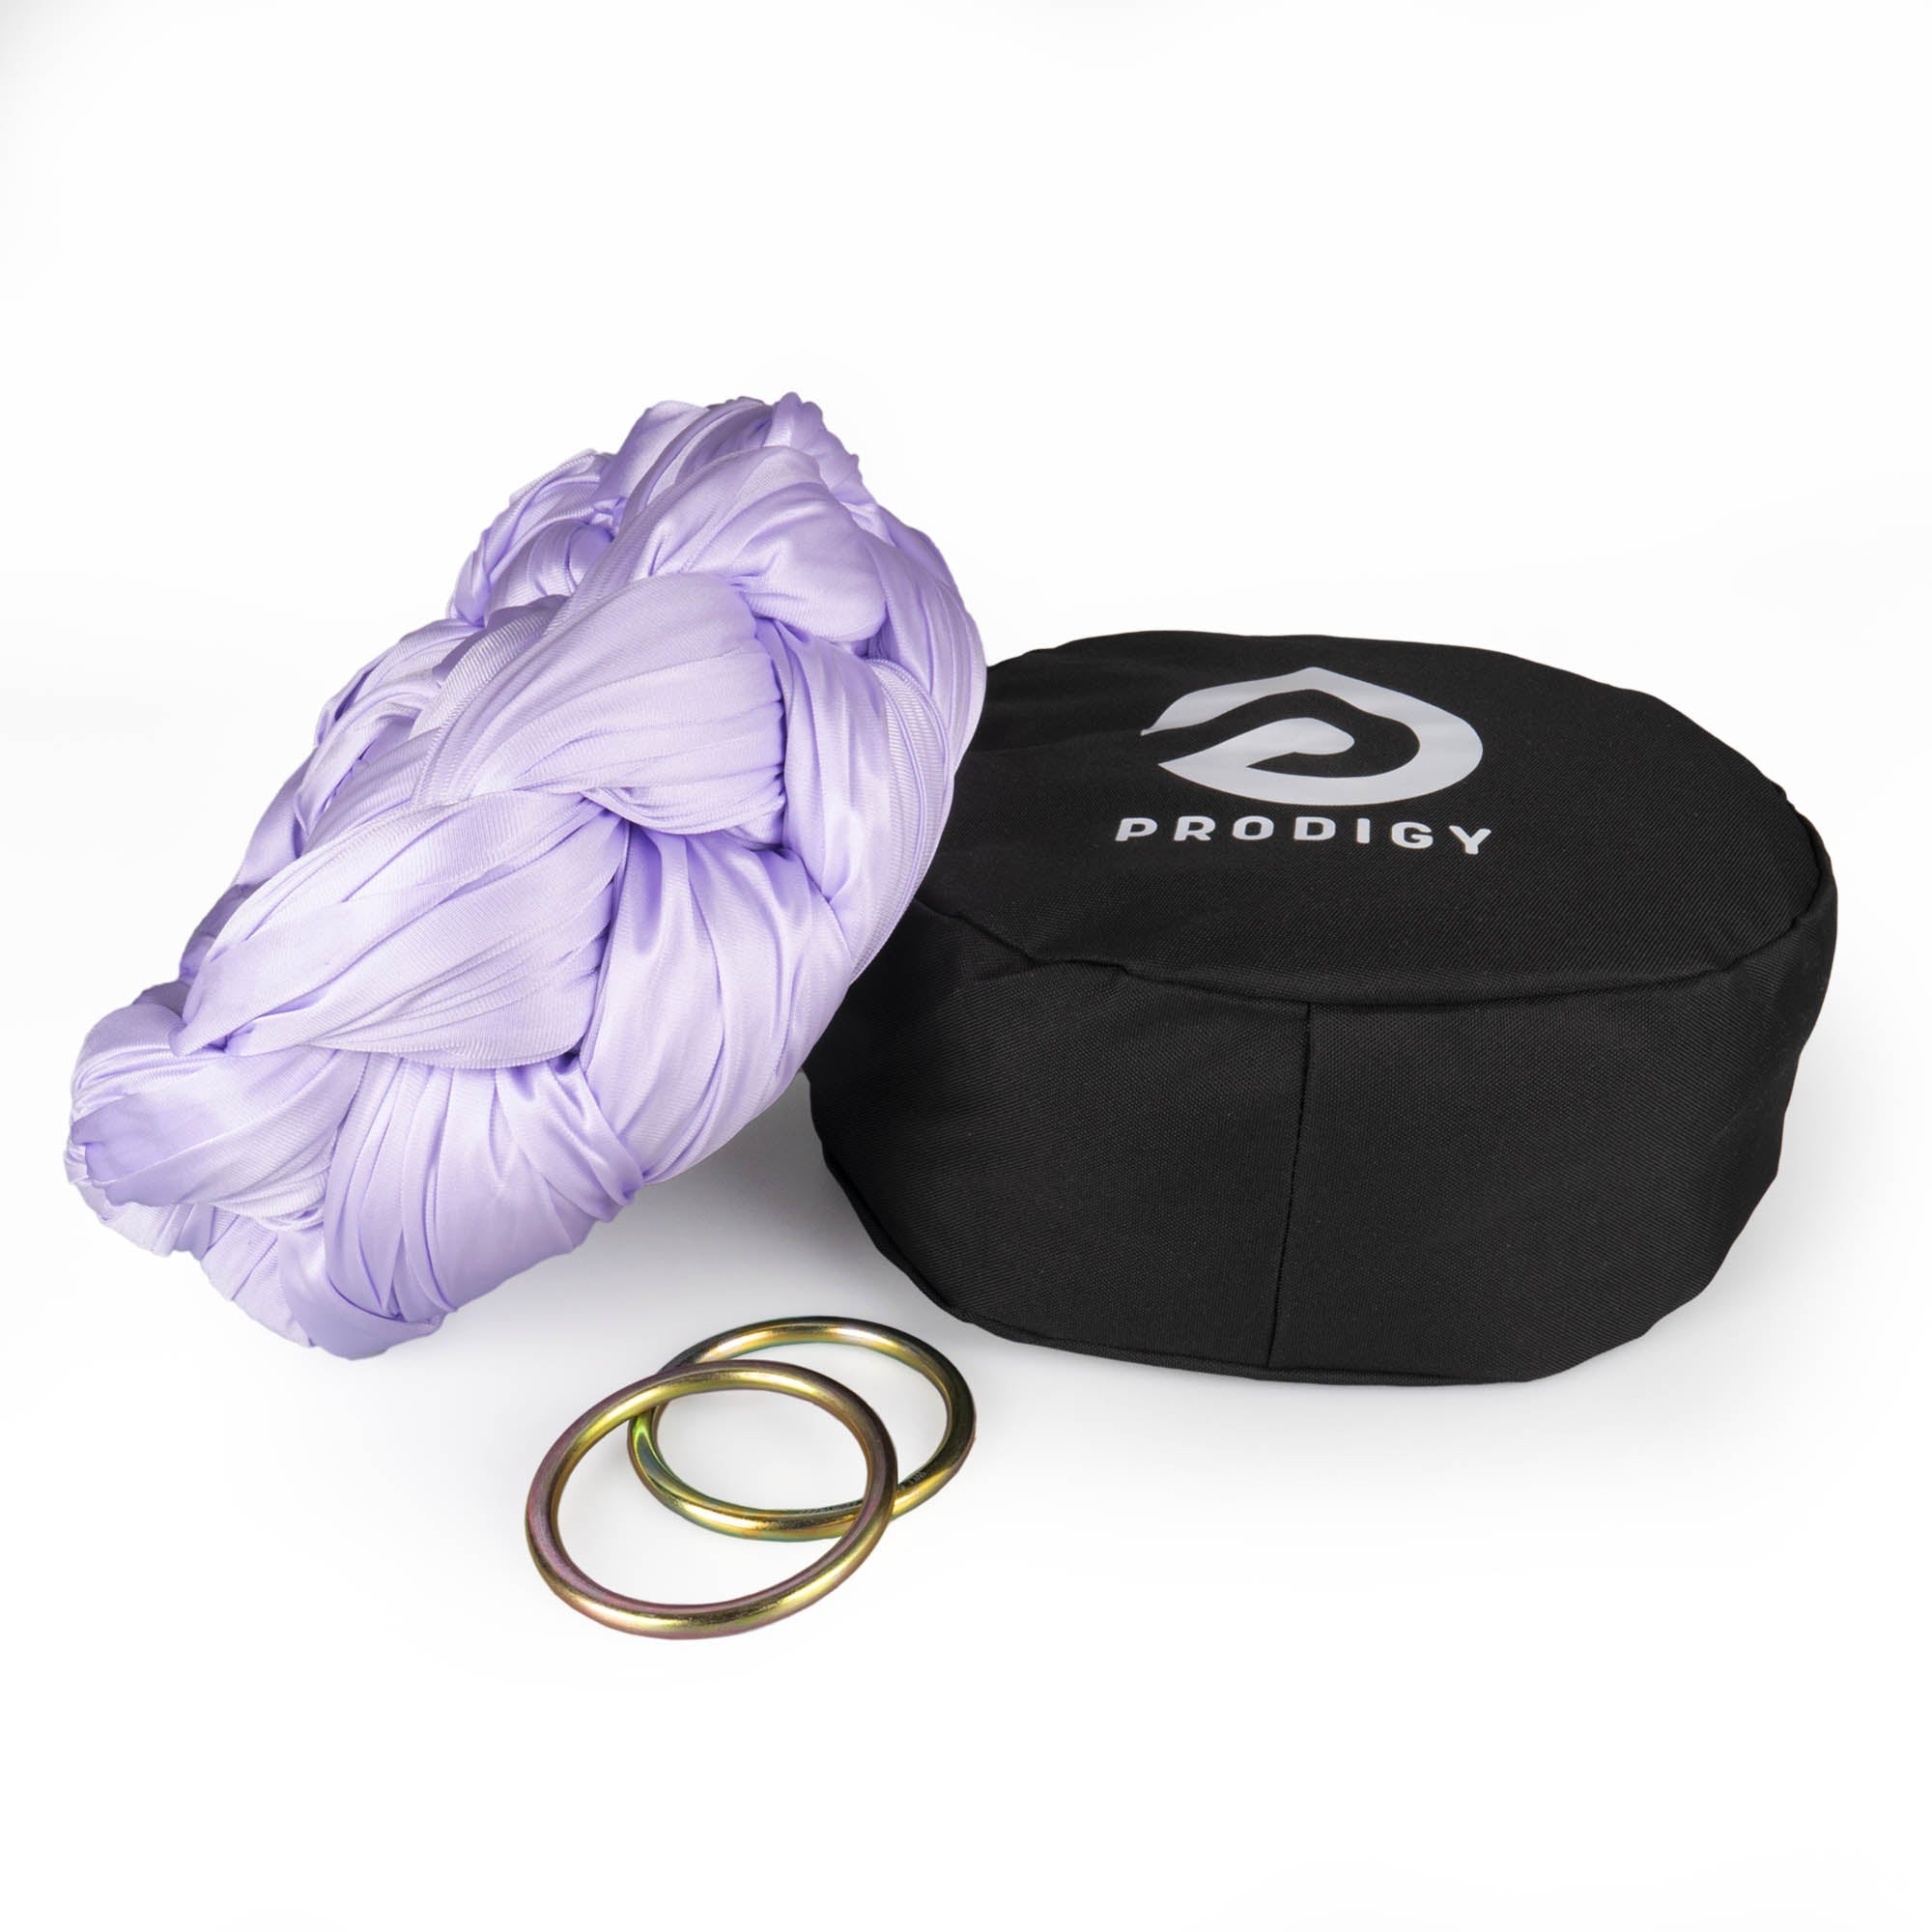 Prodigy aerial sling and O rings and bag - lilac sling resting on hammock bag